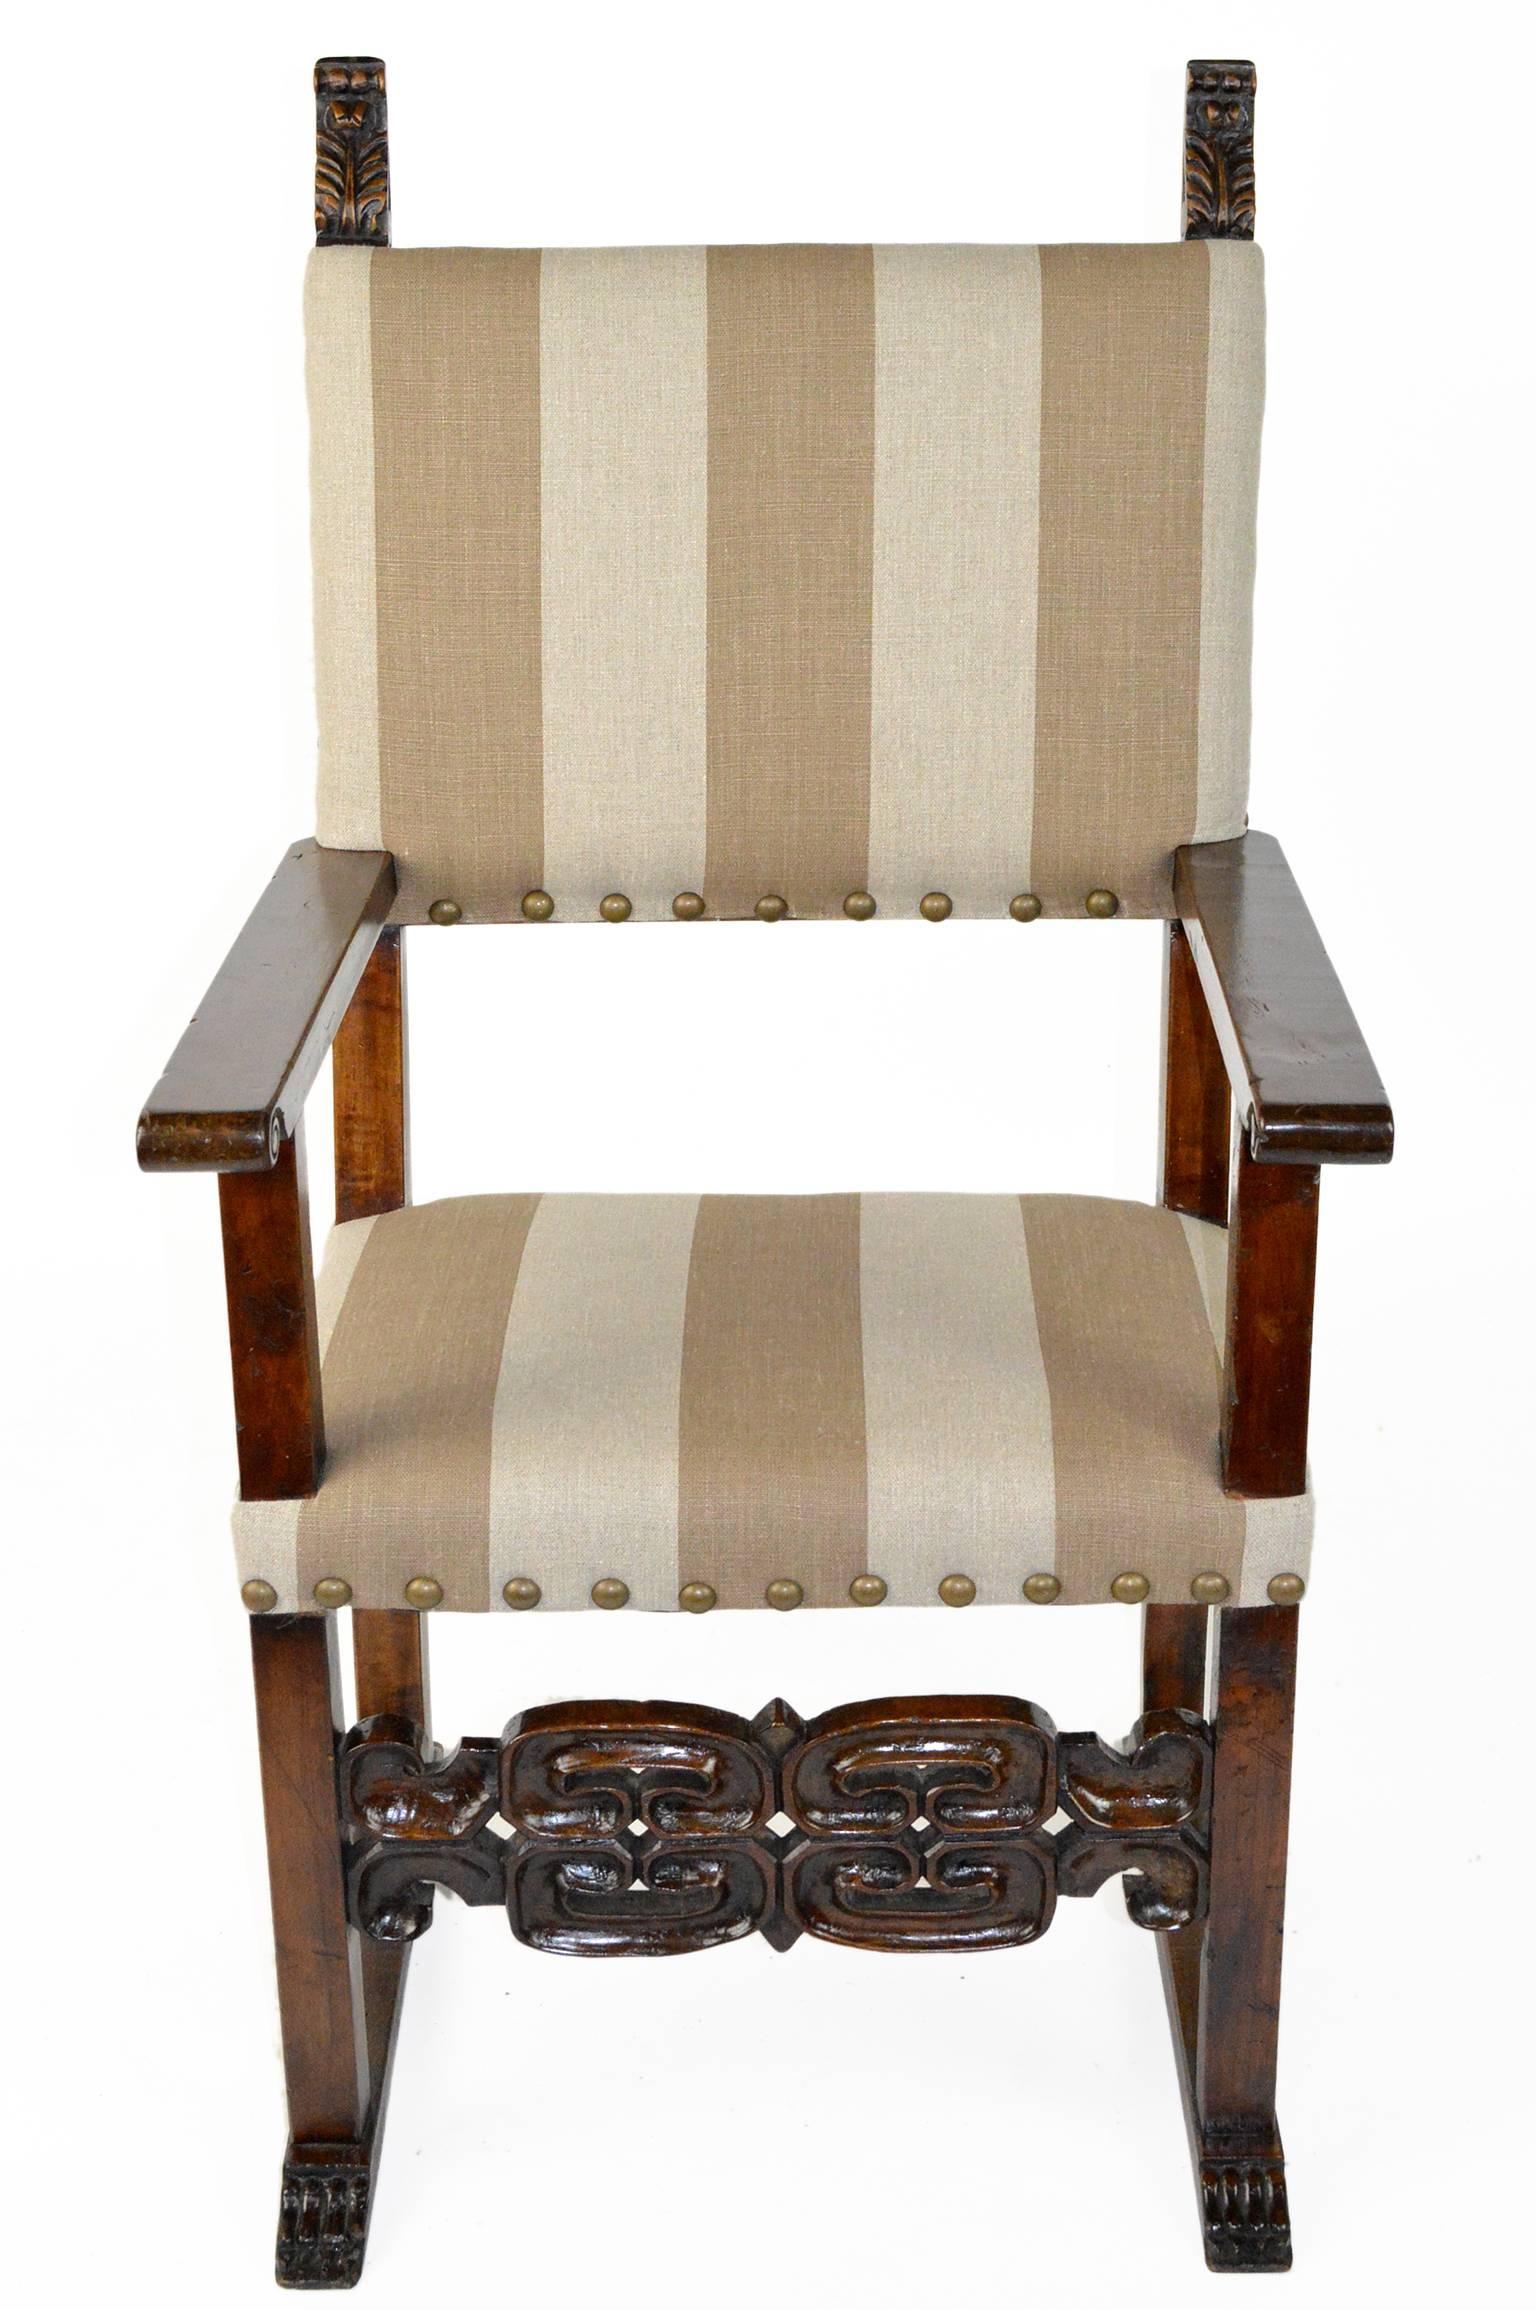 Pair of Italian walnut throne chairs with intricately carved stretcher and finials.